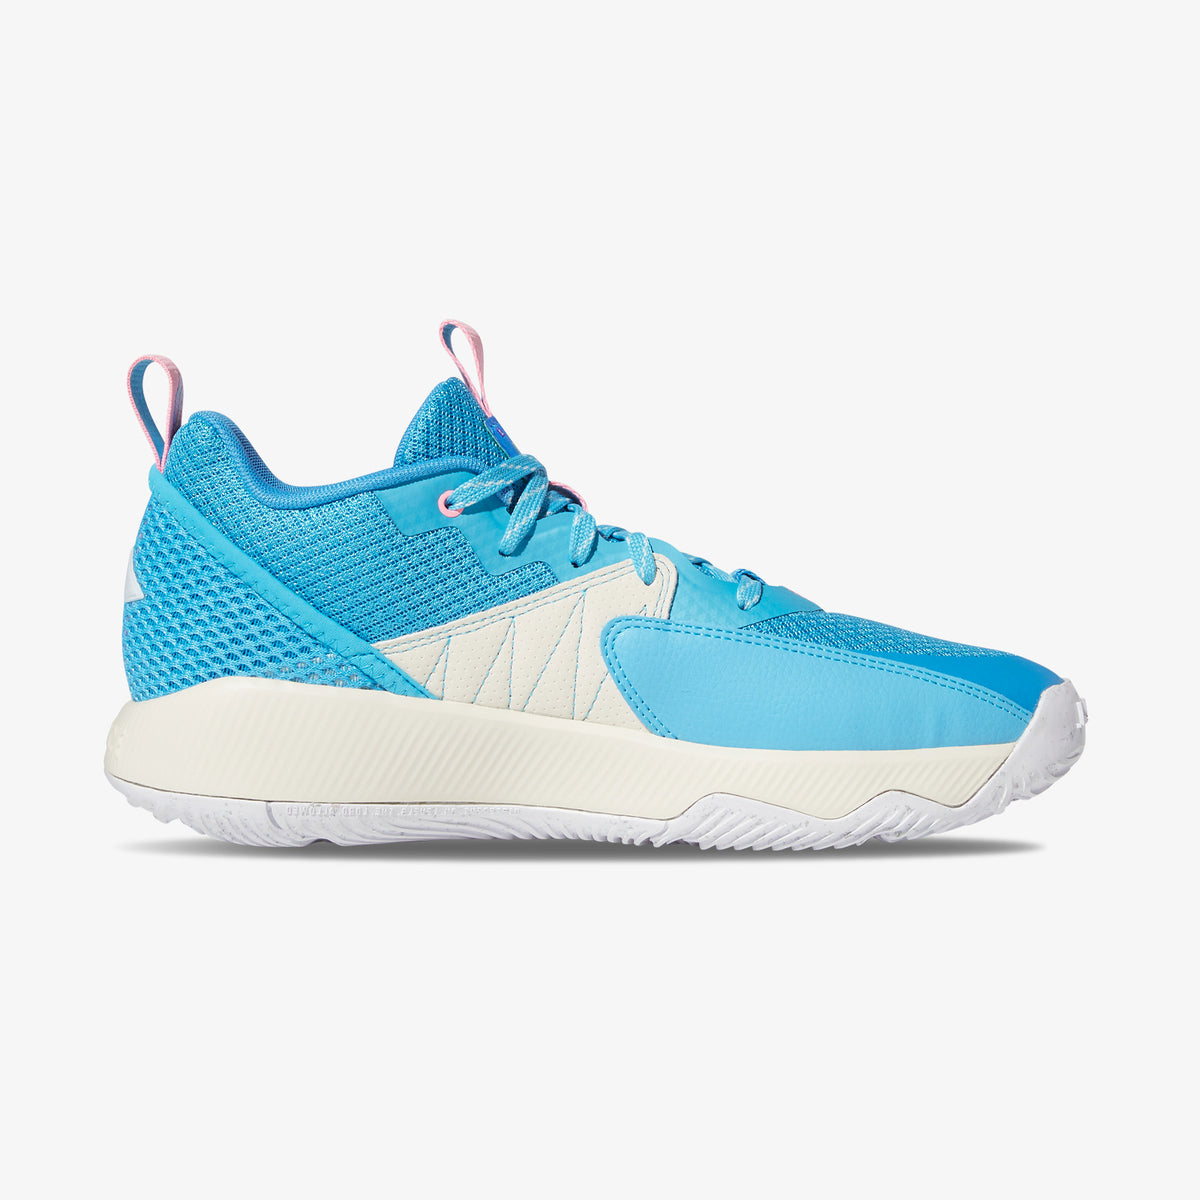 Dame Certified EXTPLY 2.0 - Turquoise